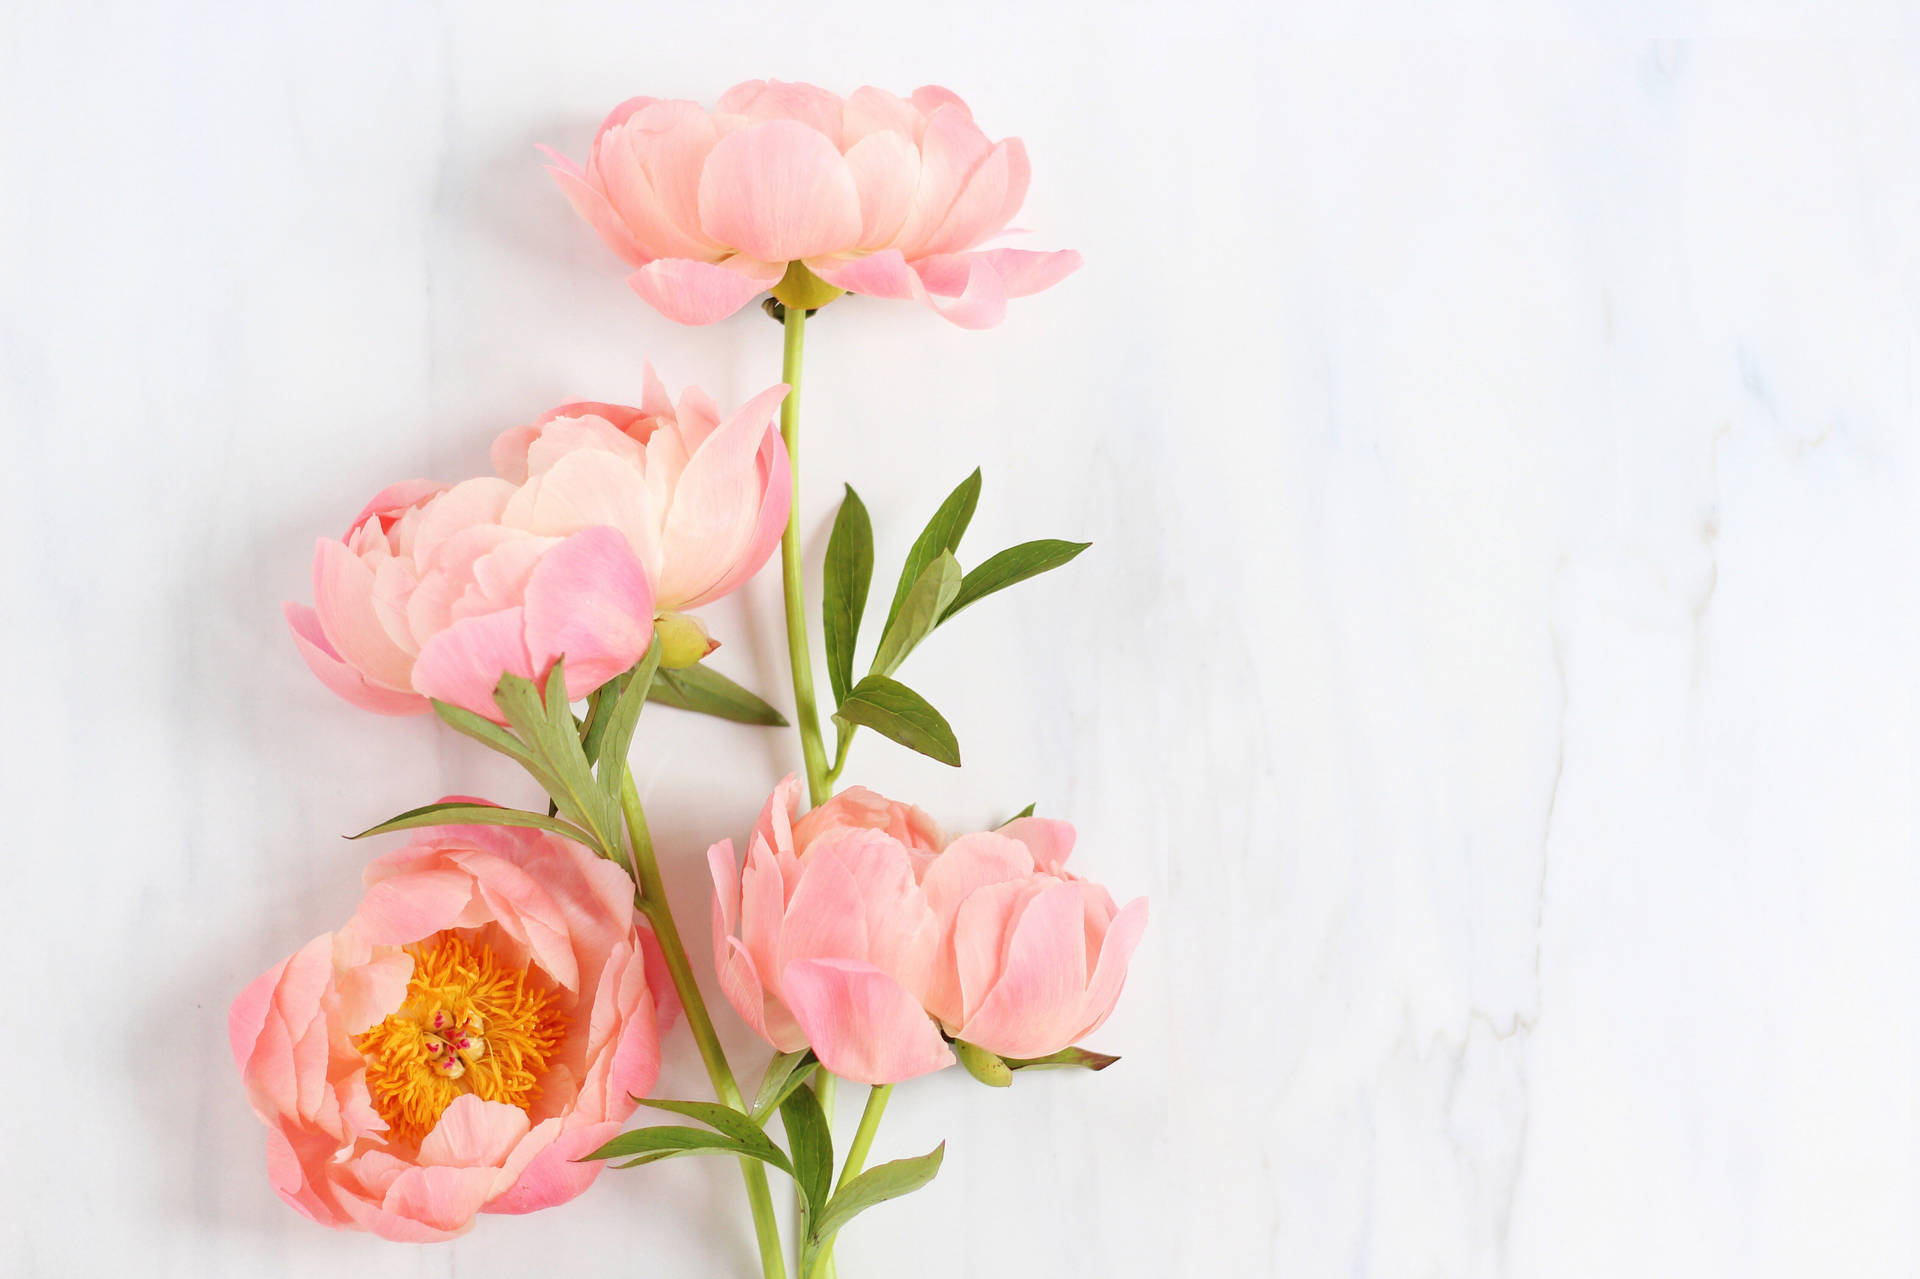 Peony Flowers On Marble Surface Wallpaper